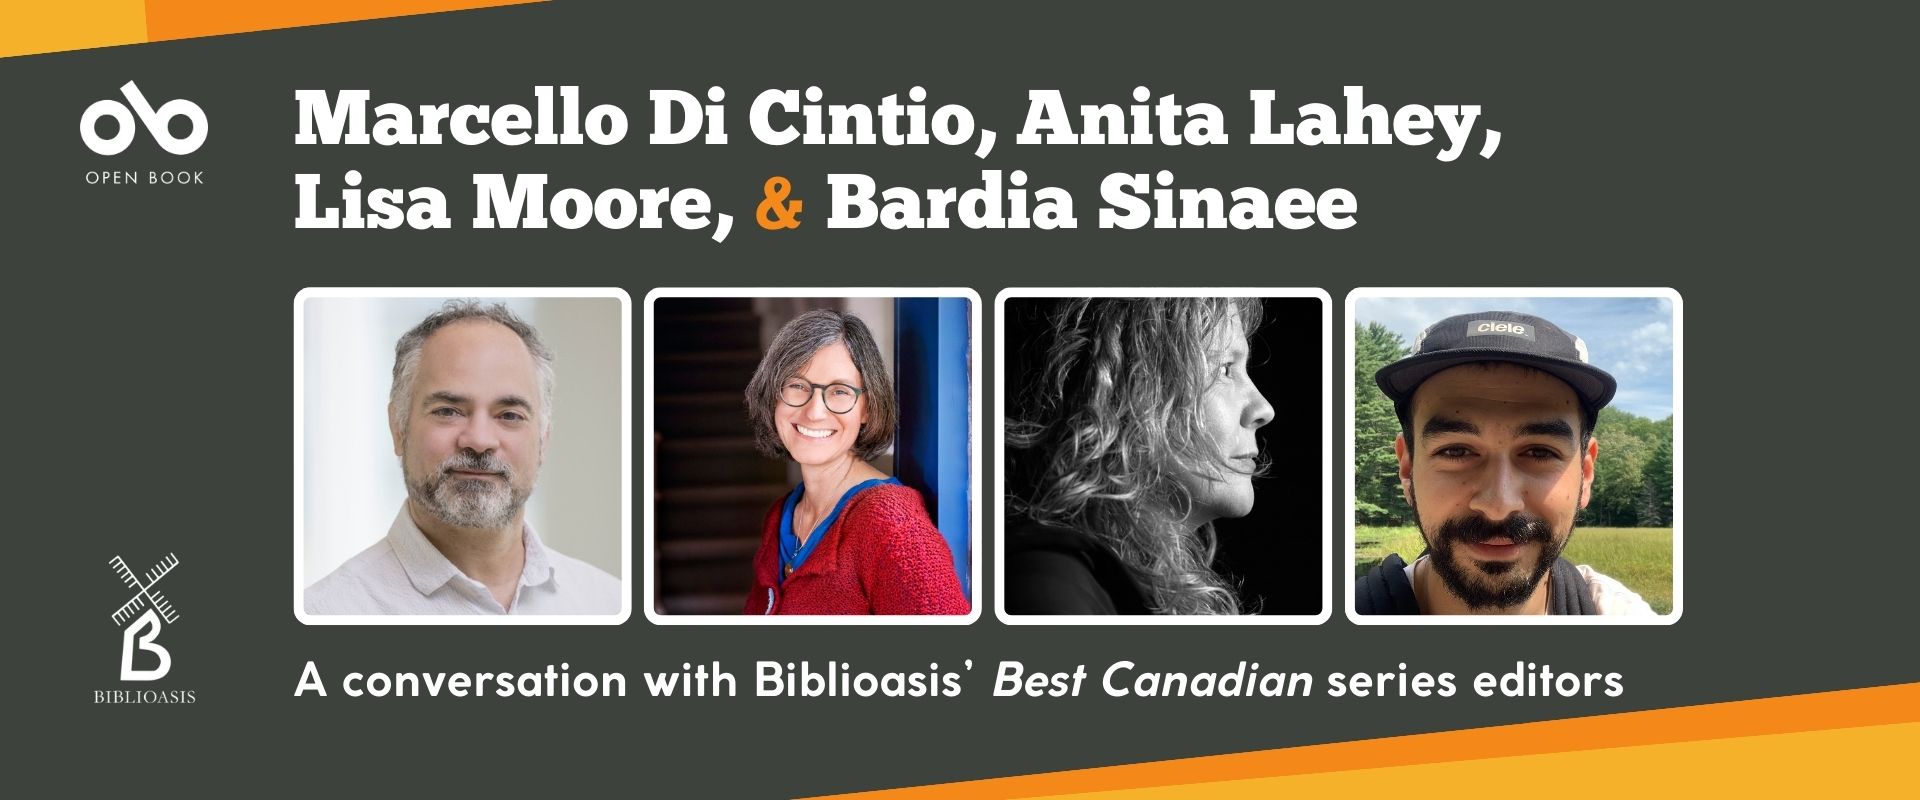 Banner image with grey and orange background. Text reads Marcello Di Cintio, Anita Lahey,  Lisa Moore, & Bardia Sinaee A conversation with Biblioasis’ Best Canadian series editors. Open Book logo top left, Biblioasis logo bottom left. Photos of the four editors in squares in a horizontal row.